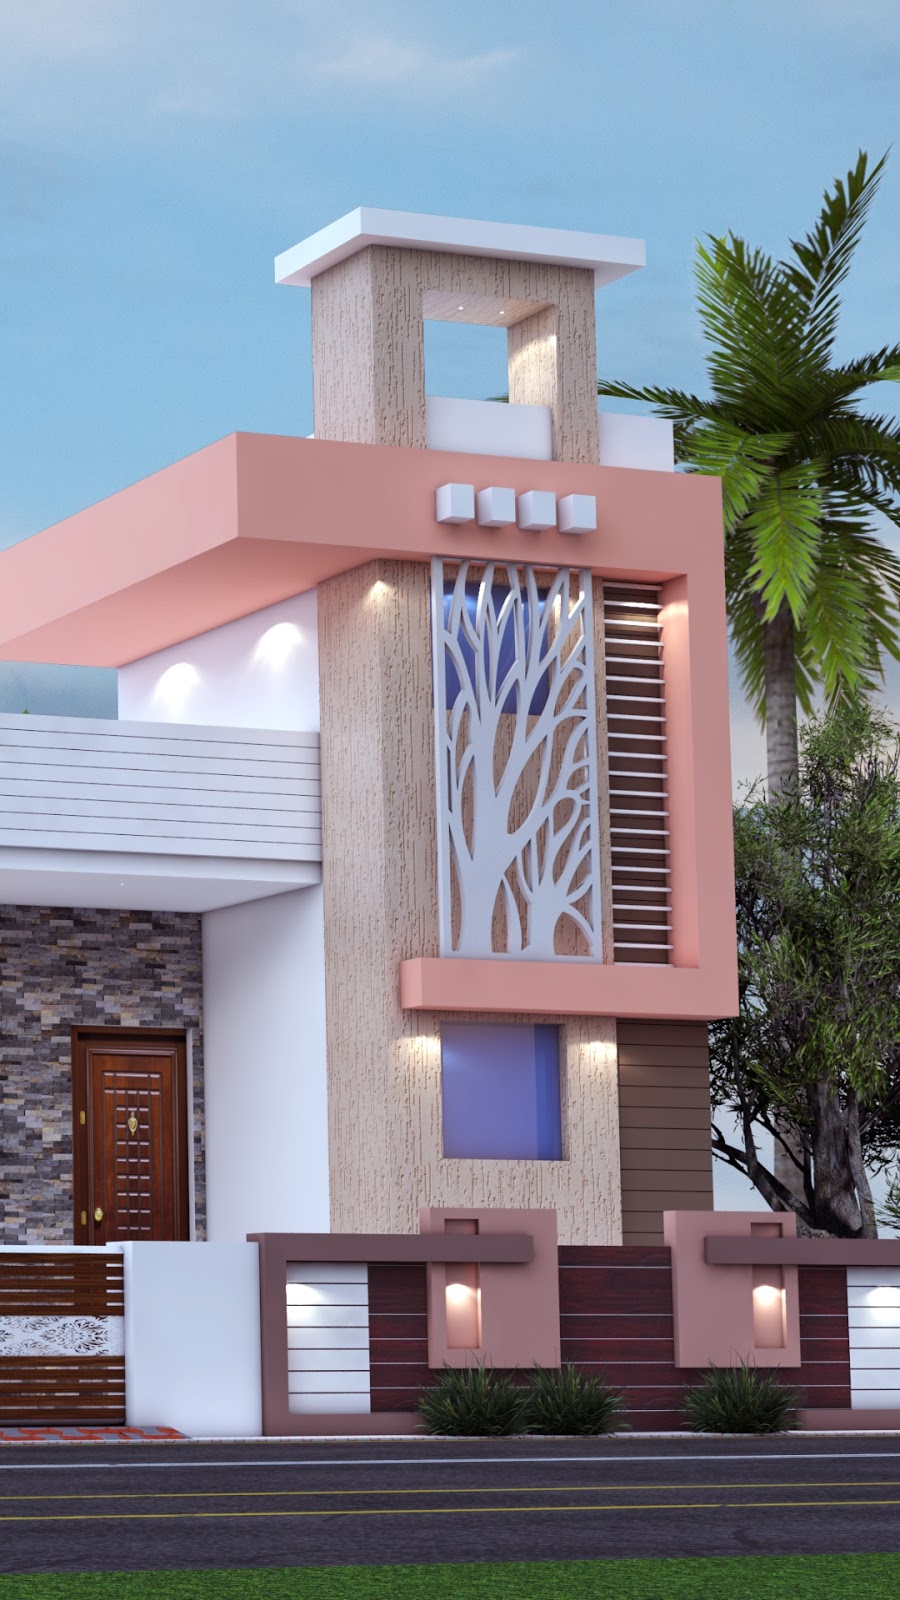 Indian staircase tower designs | Small house front design, Tower design,  House front design